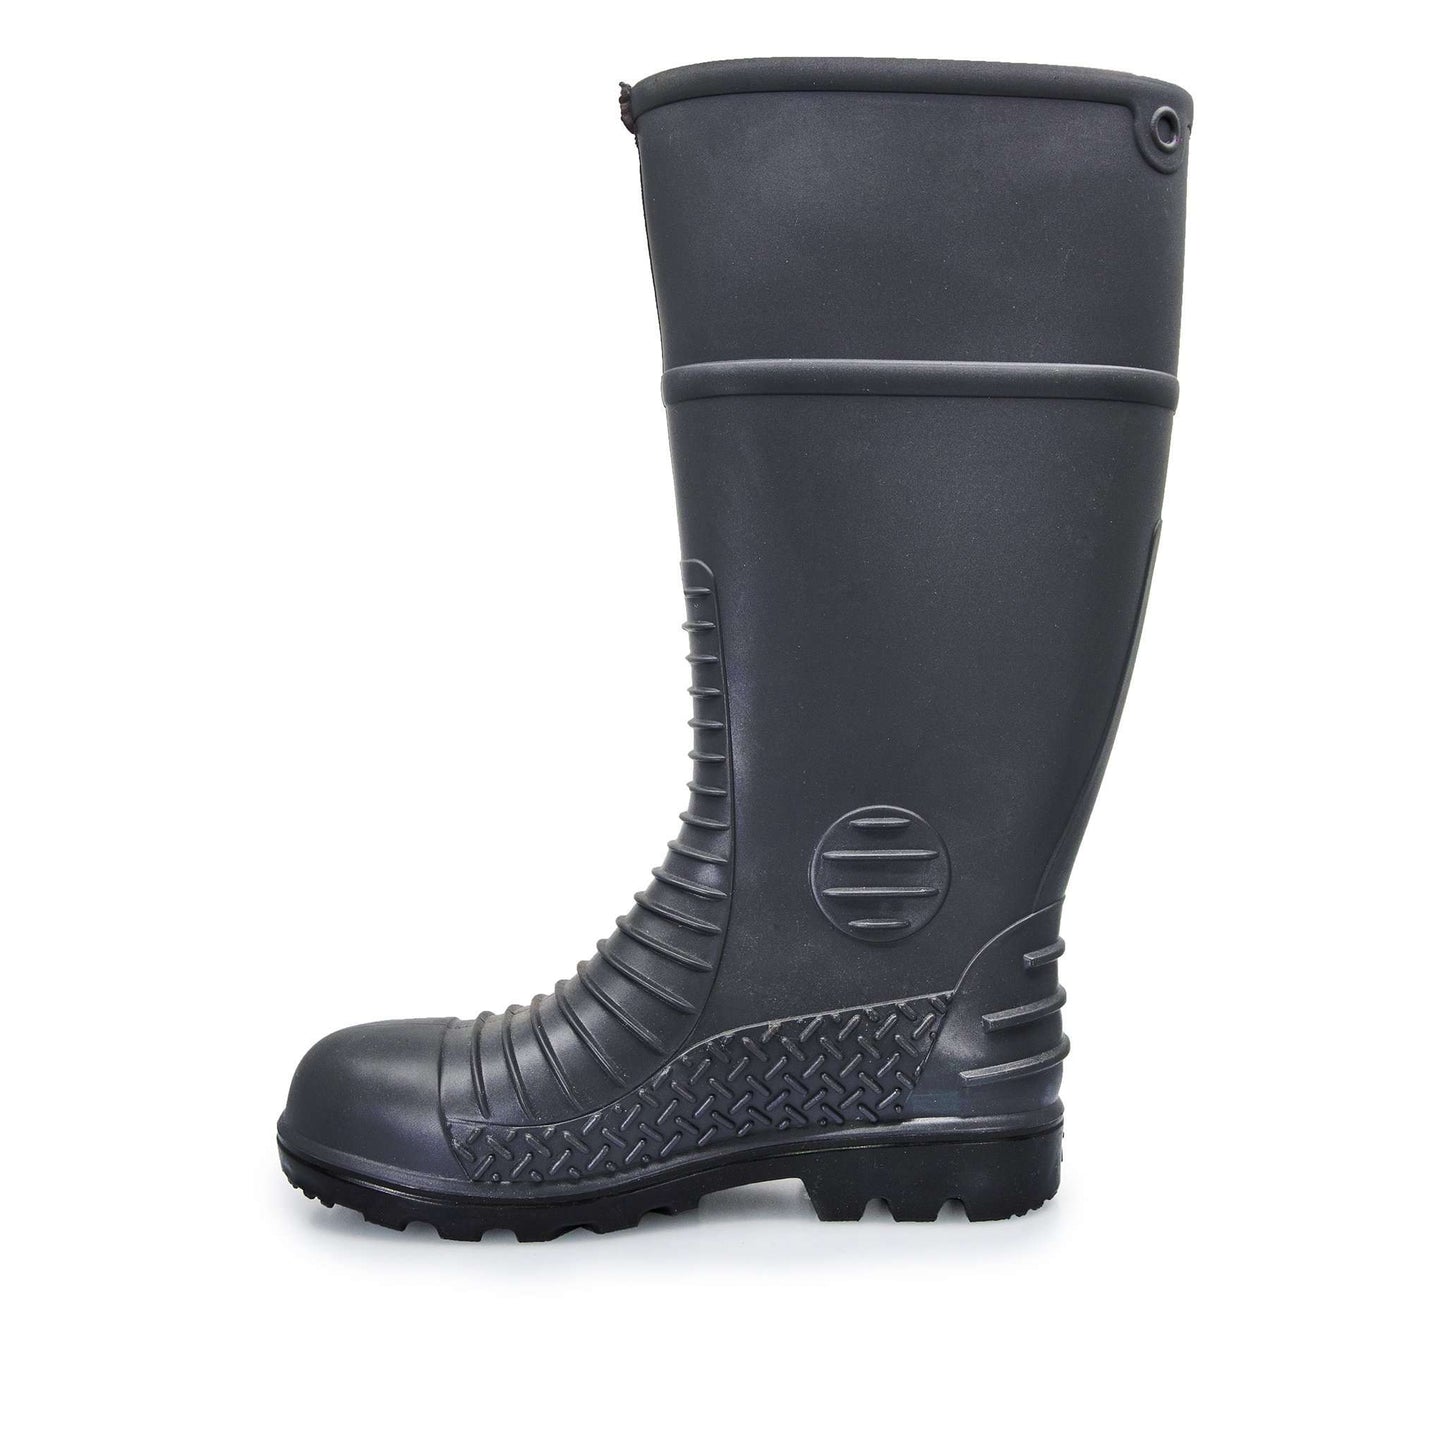 BLUNDSTONE ® SAFETY GUMBOOTS INNER SIDE